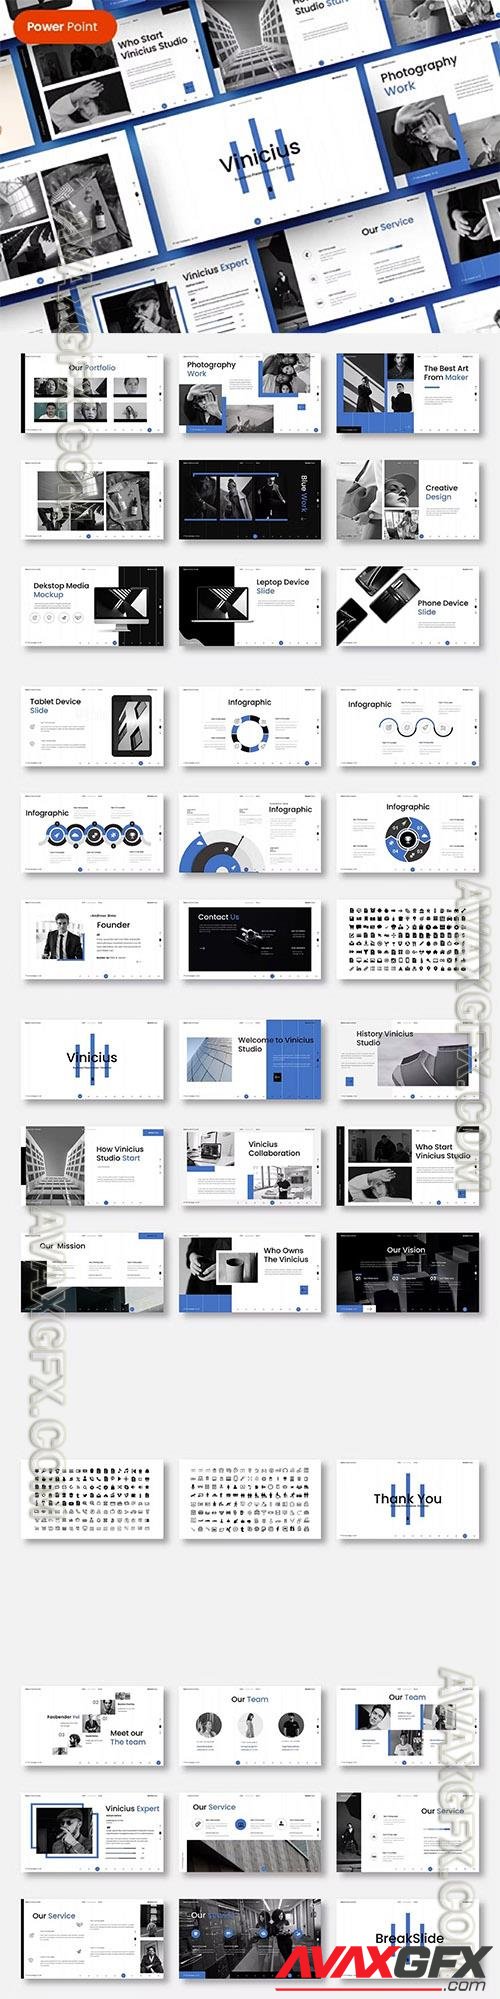 Vinicius - Business Powerpoint, Keynote and Google Slides Templates